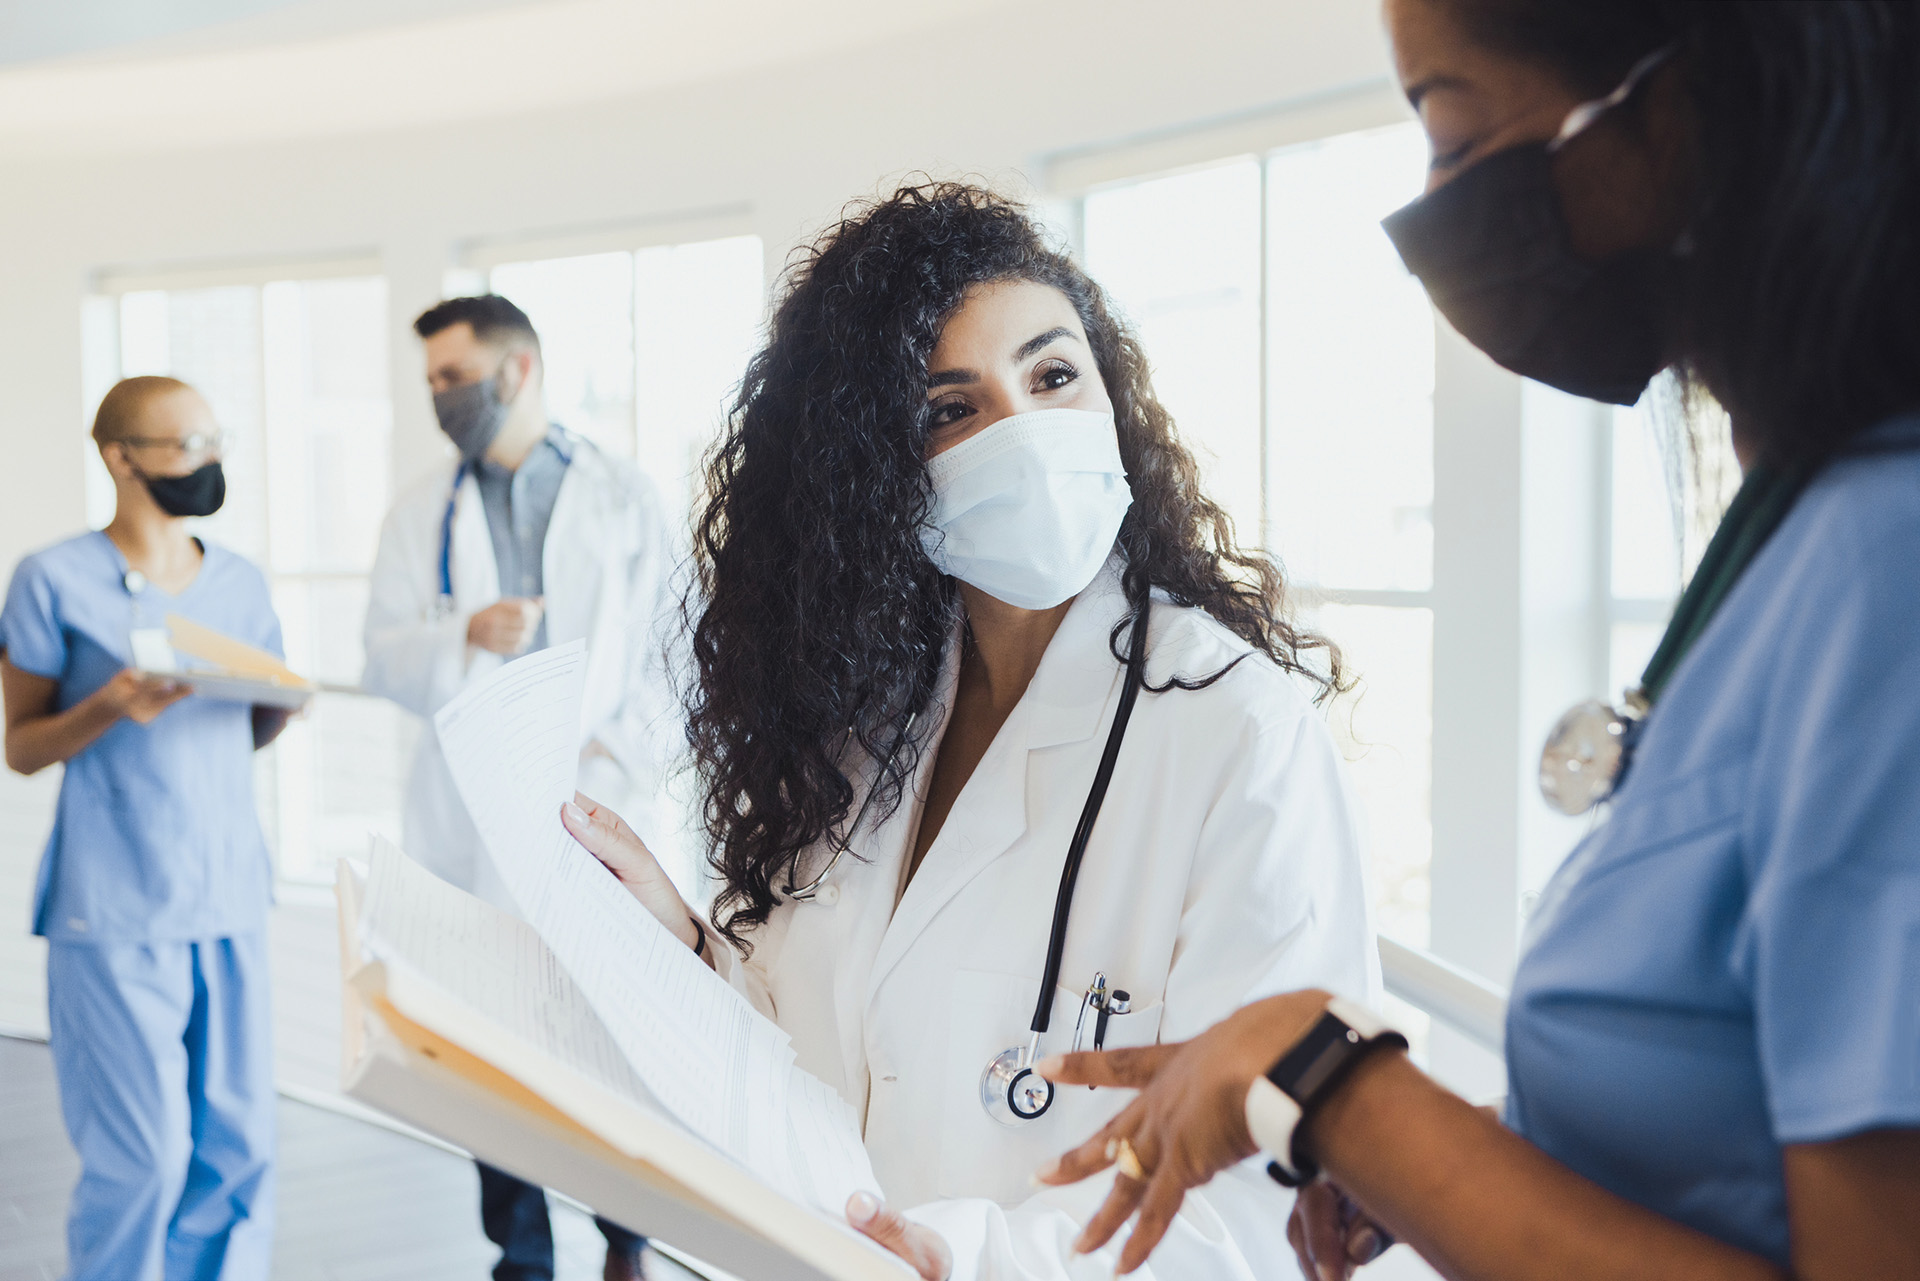 Female doctors discuss patient records in the foreground, while in the background a mid adult male doctor answers a female nurse's questions.  Everyone wears protective masks.